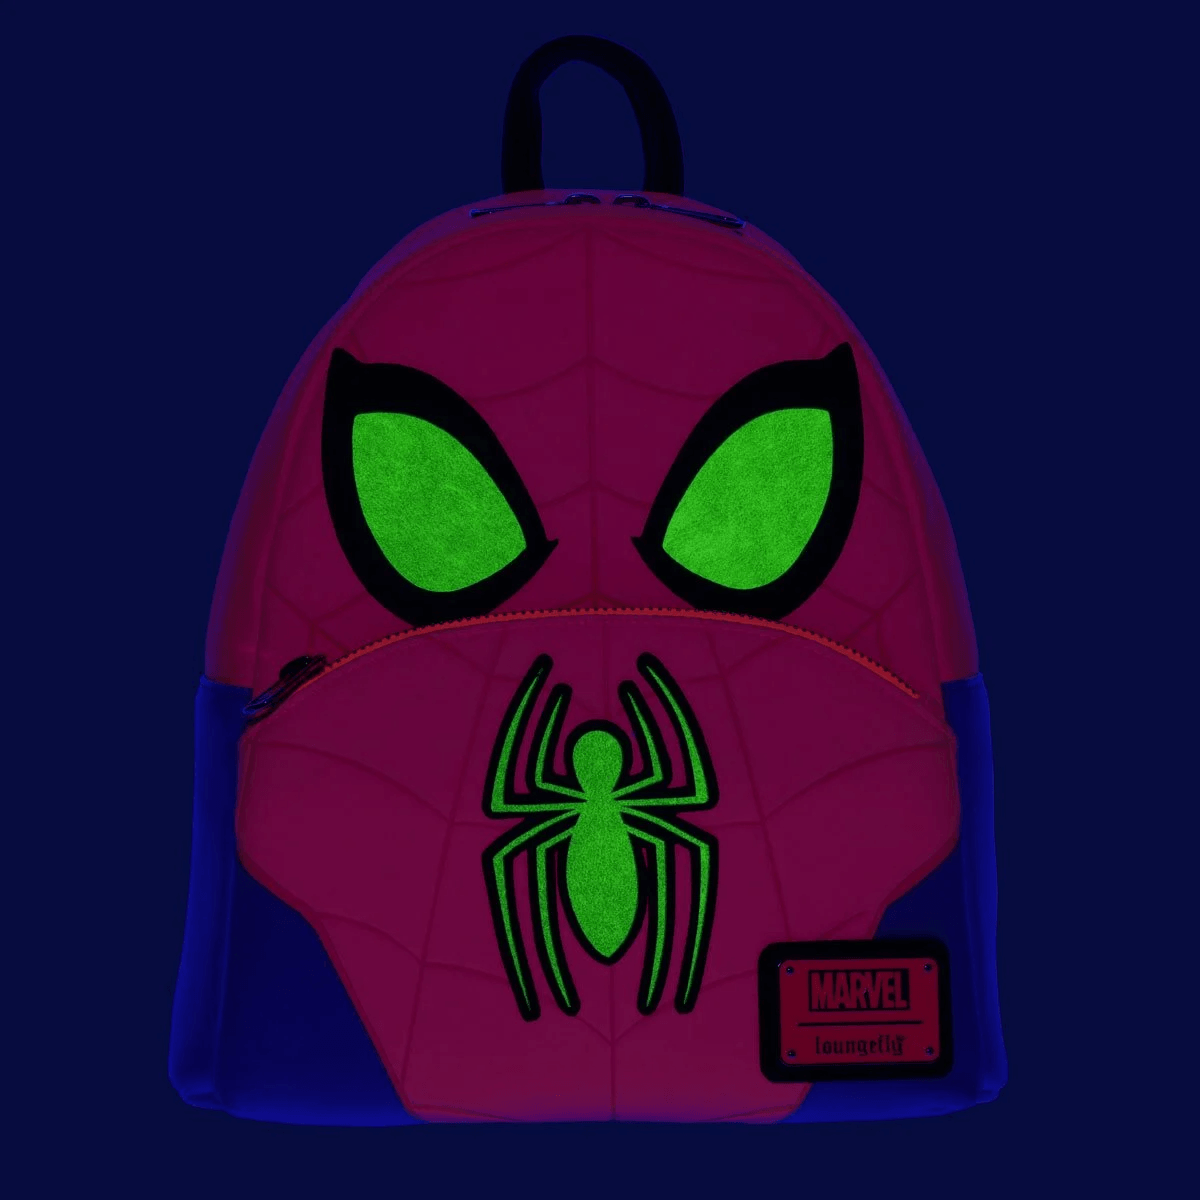 LOUMVBK0311 Marvel - Spider-Man "Glow in the Dark" Cosplay Mini Backpack US Exclusive [RS] - Loungefly - Titan Pop Culture